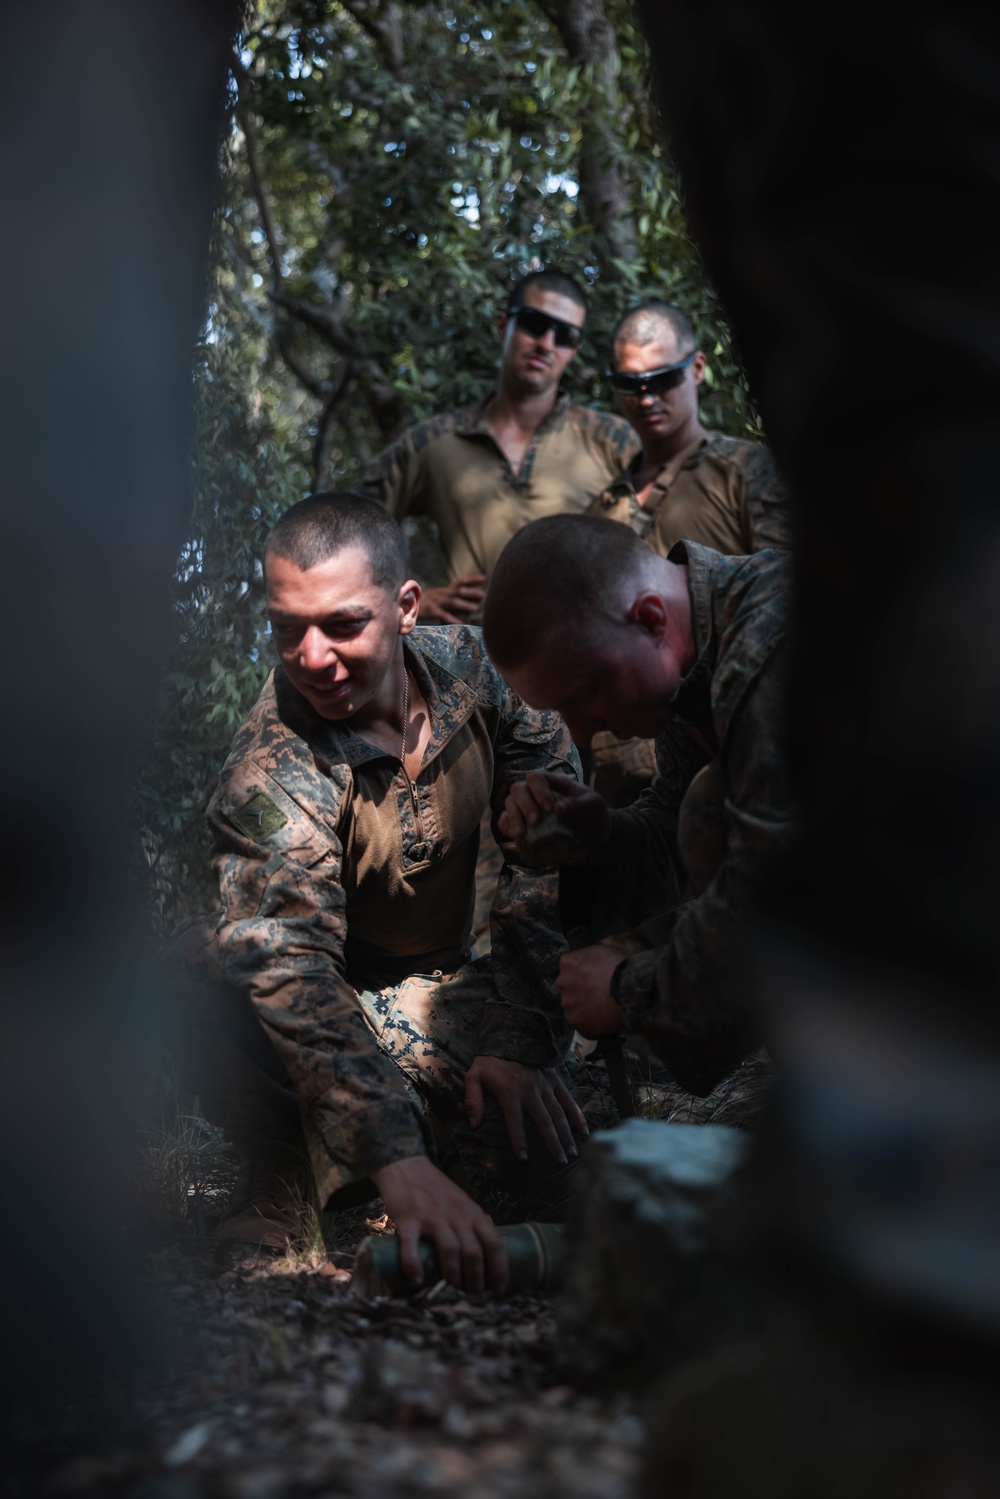 Balikatan 24: 3rd LCT attends bilateral jungle survival class with PMC